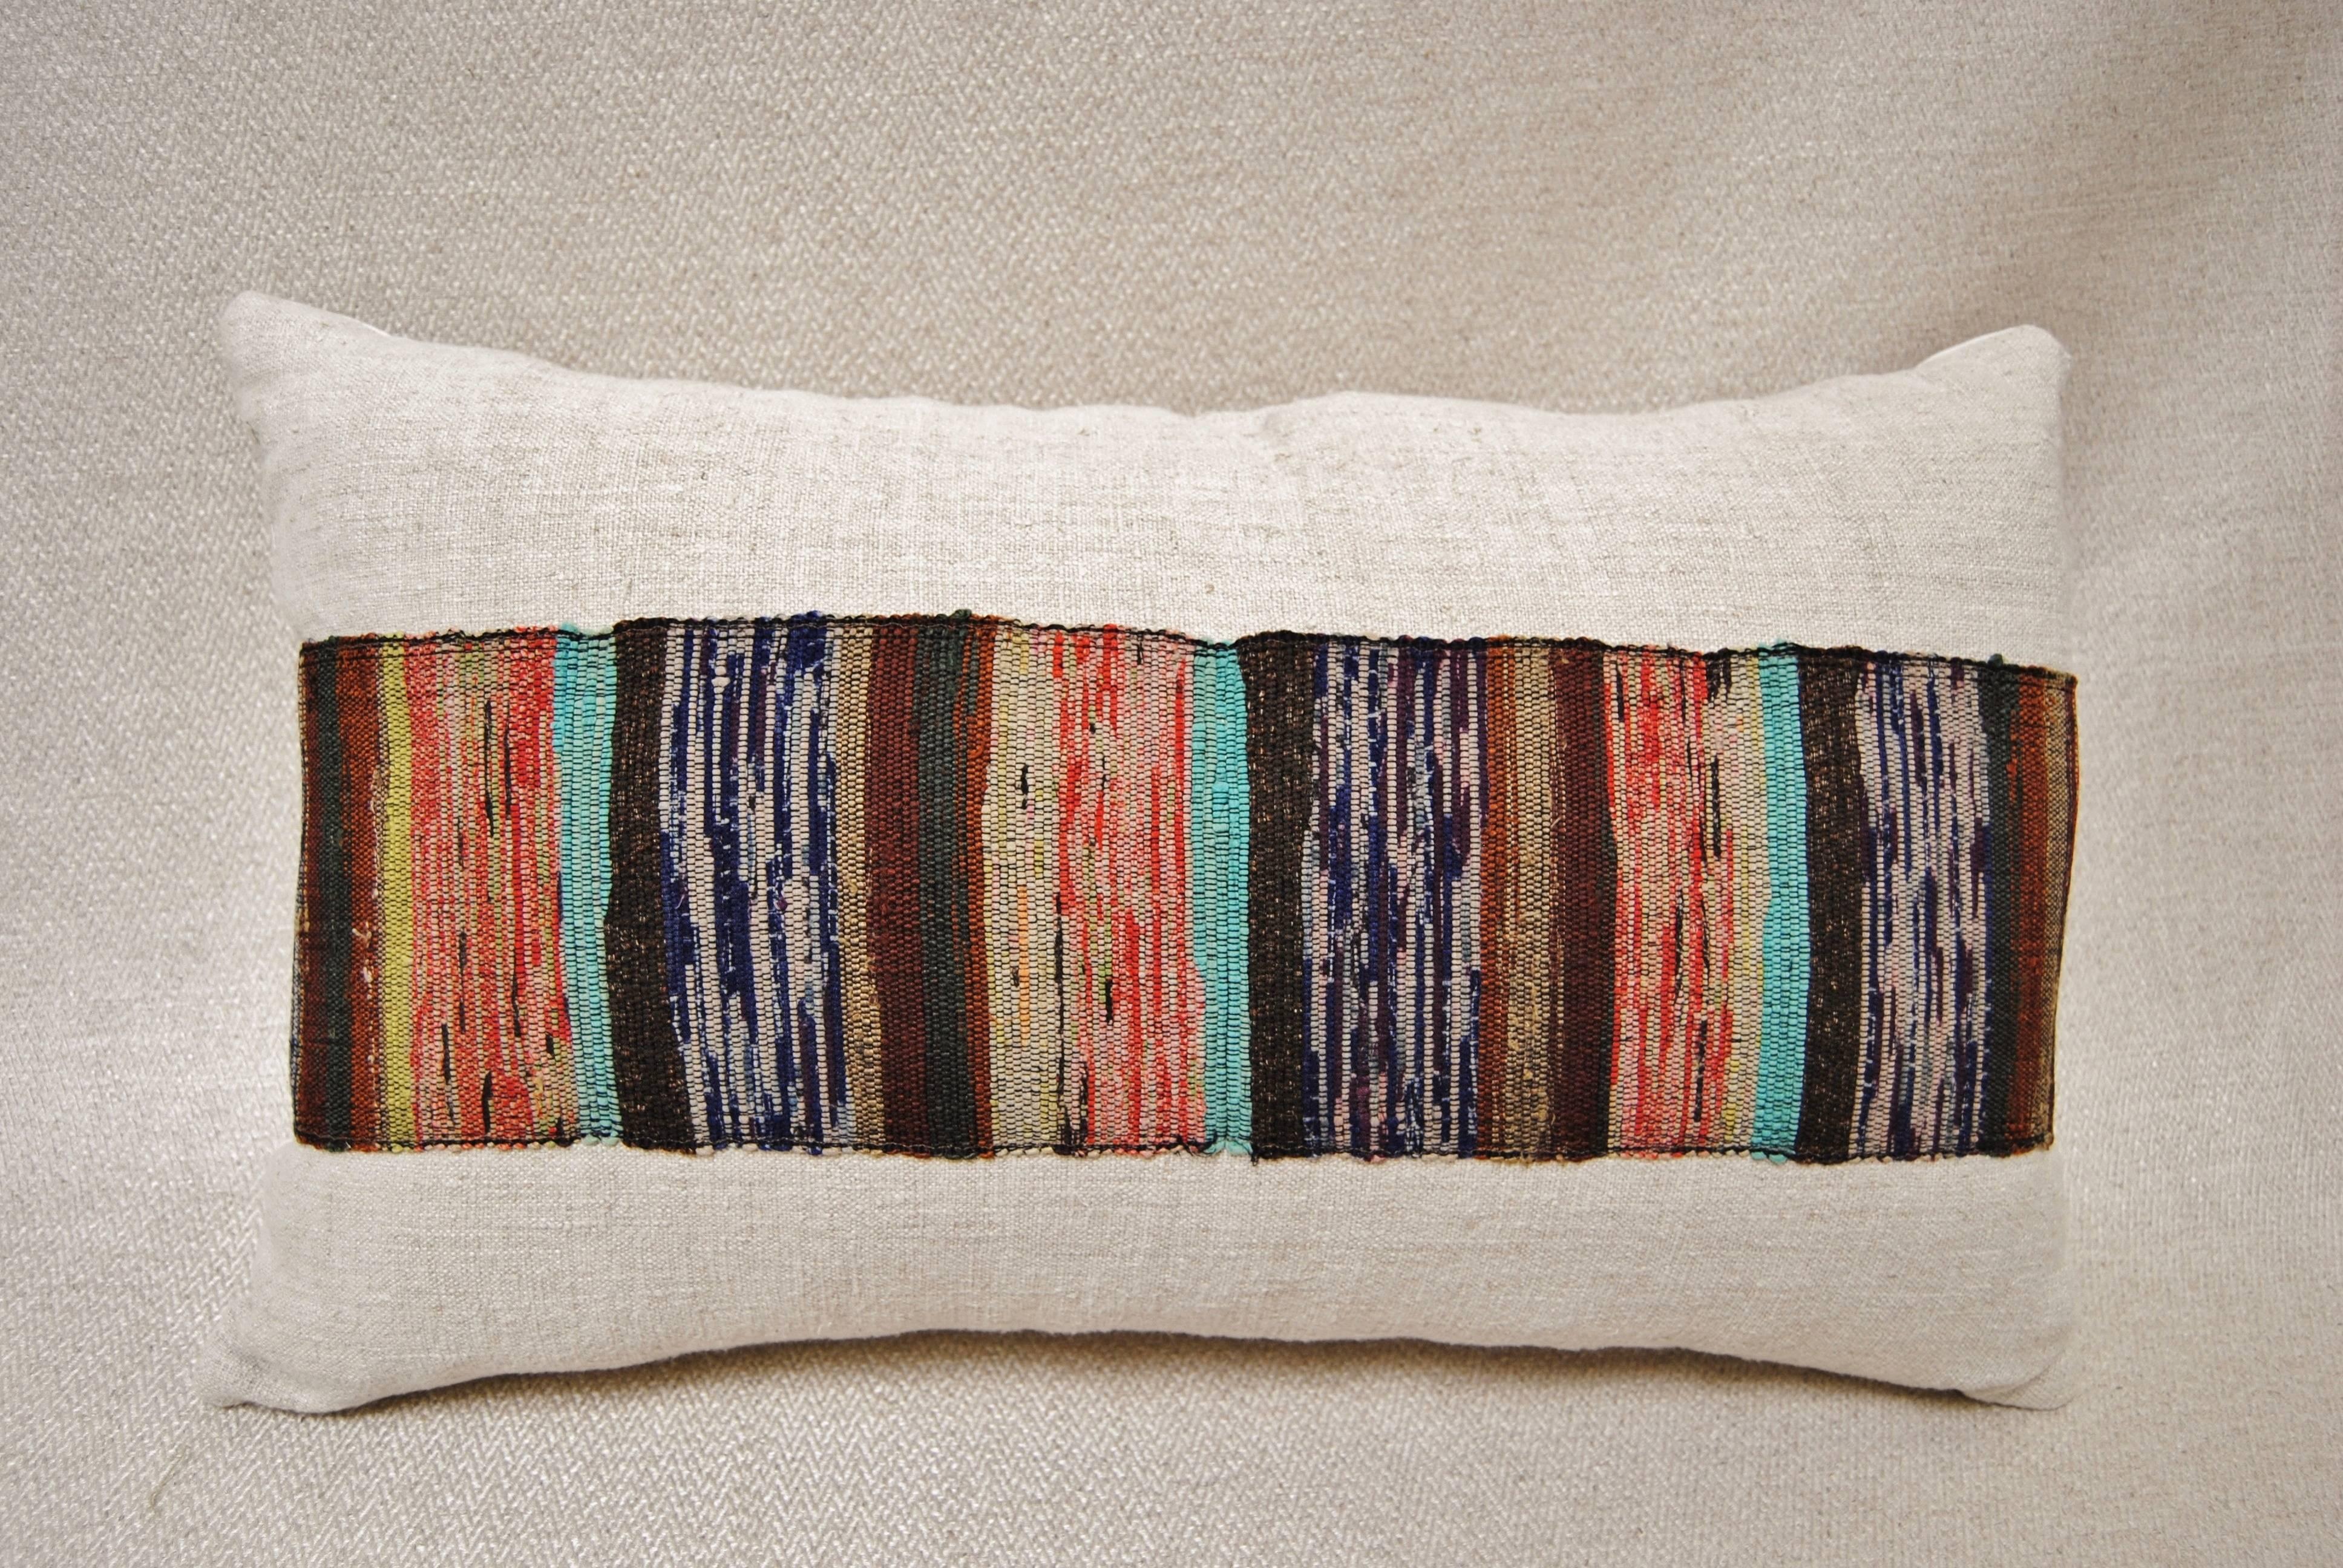 Custom pillow cut from a vintage Japanese hand loomed sakiori obi. Sakiori is the Japanese technique of fine rag weaving. Remnants of silk and assorted textiles are cut into thin strips and rewoven into obis. This vintage obi is backed by hand